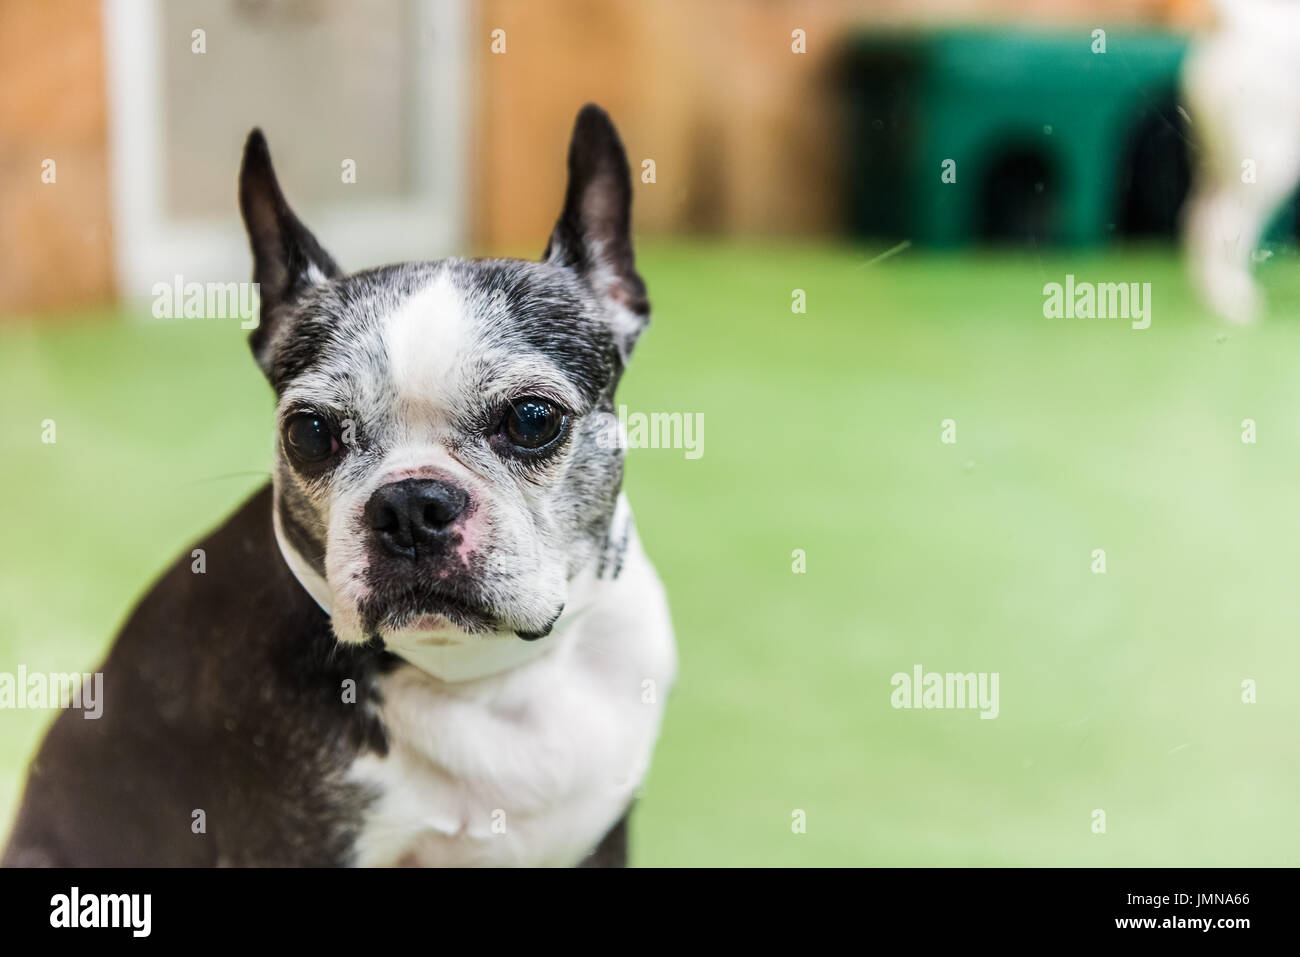 Closeup portrait of boston terrier dog looking scared Stock Photo